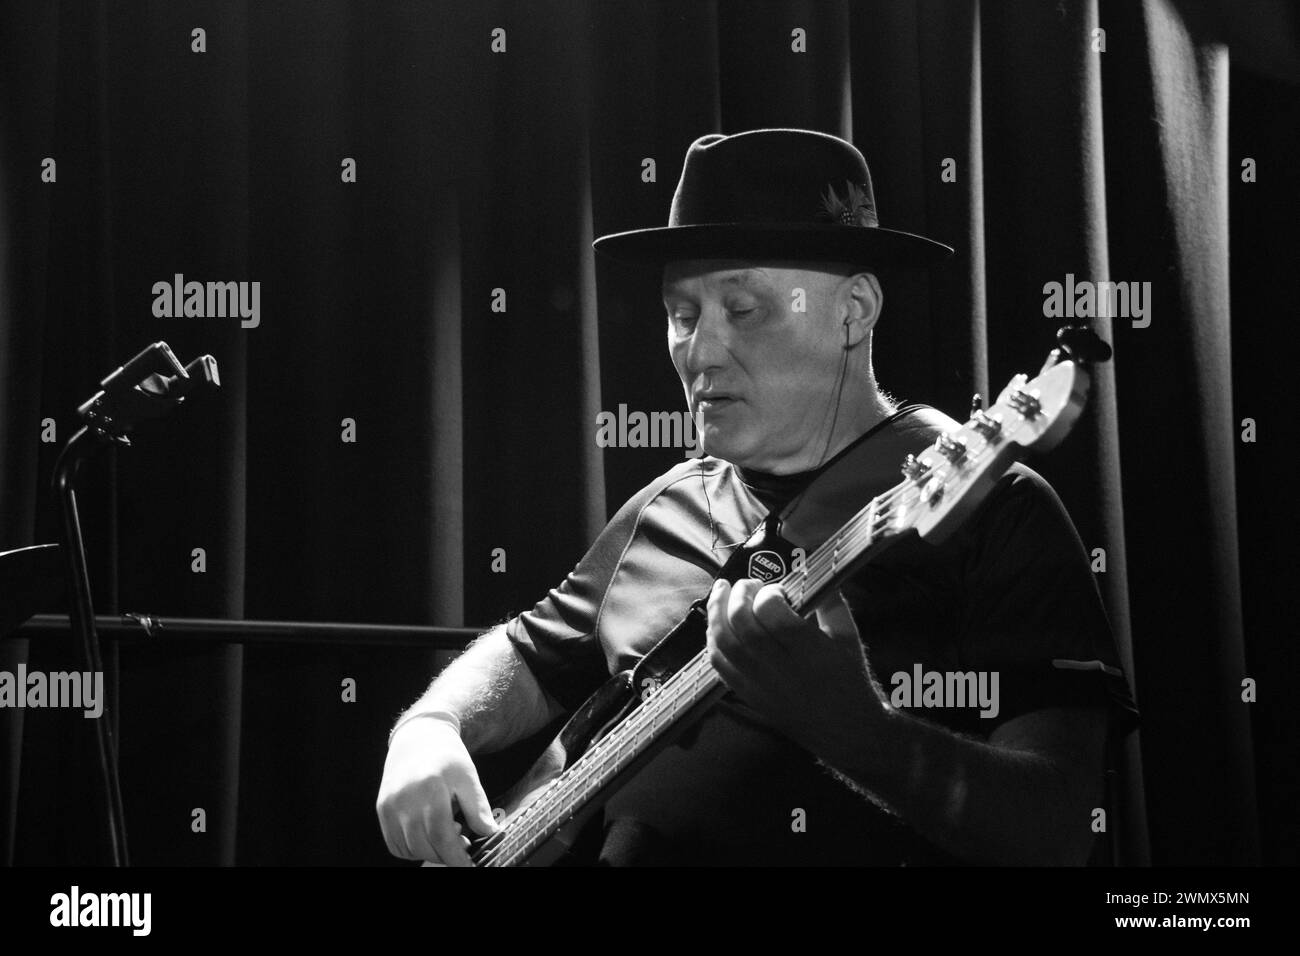 Jah Wobble in concert playing Metal Box in dub.. Stock Photo